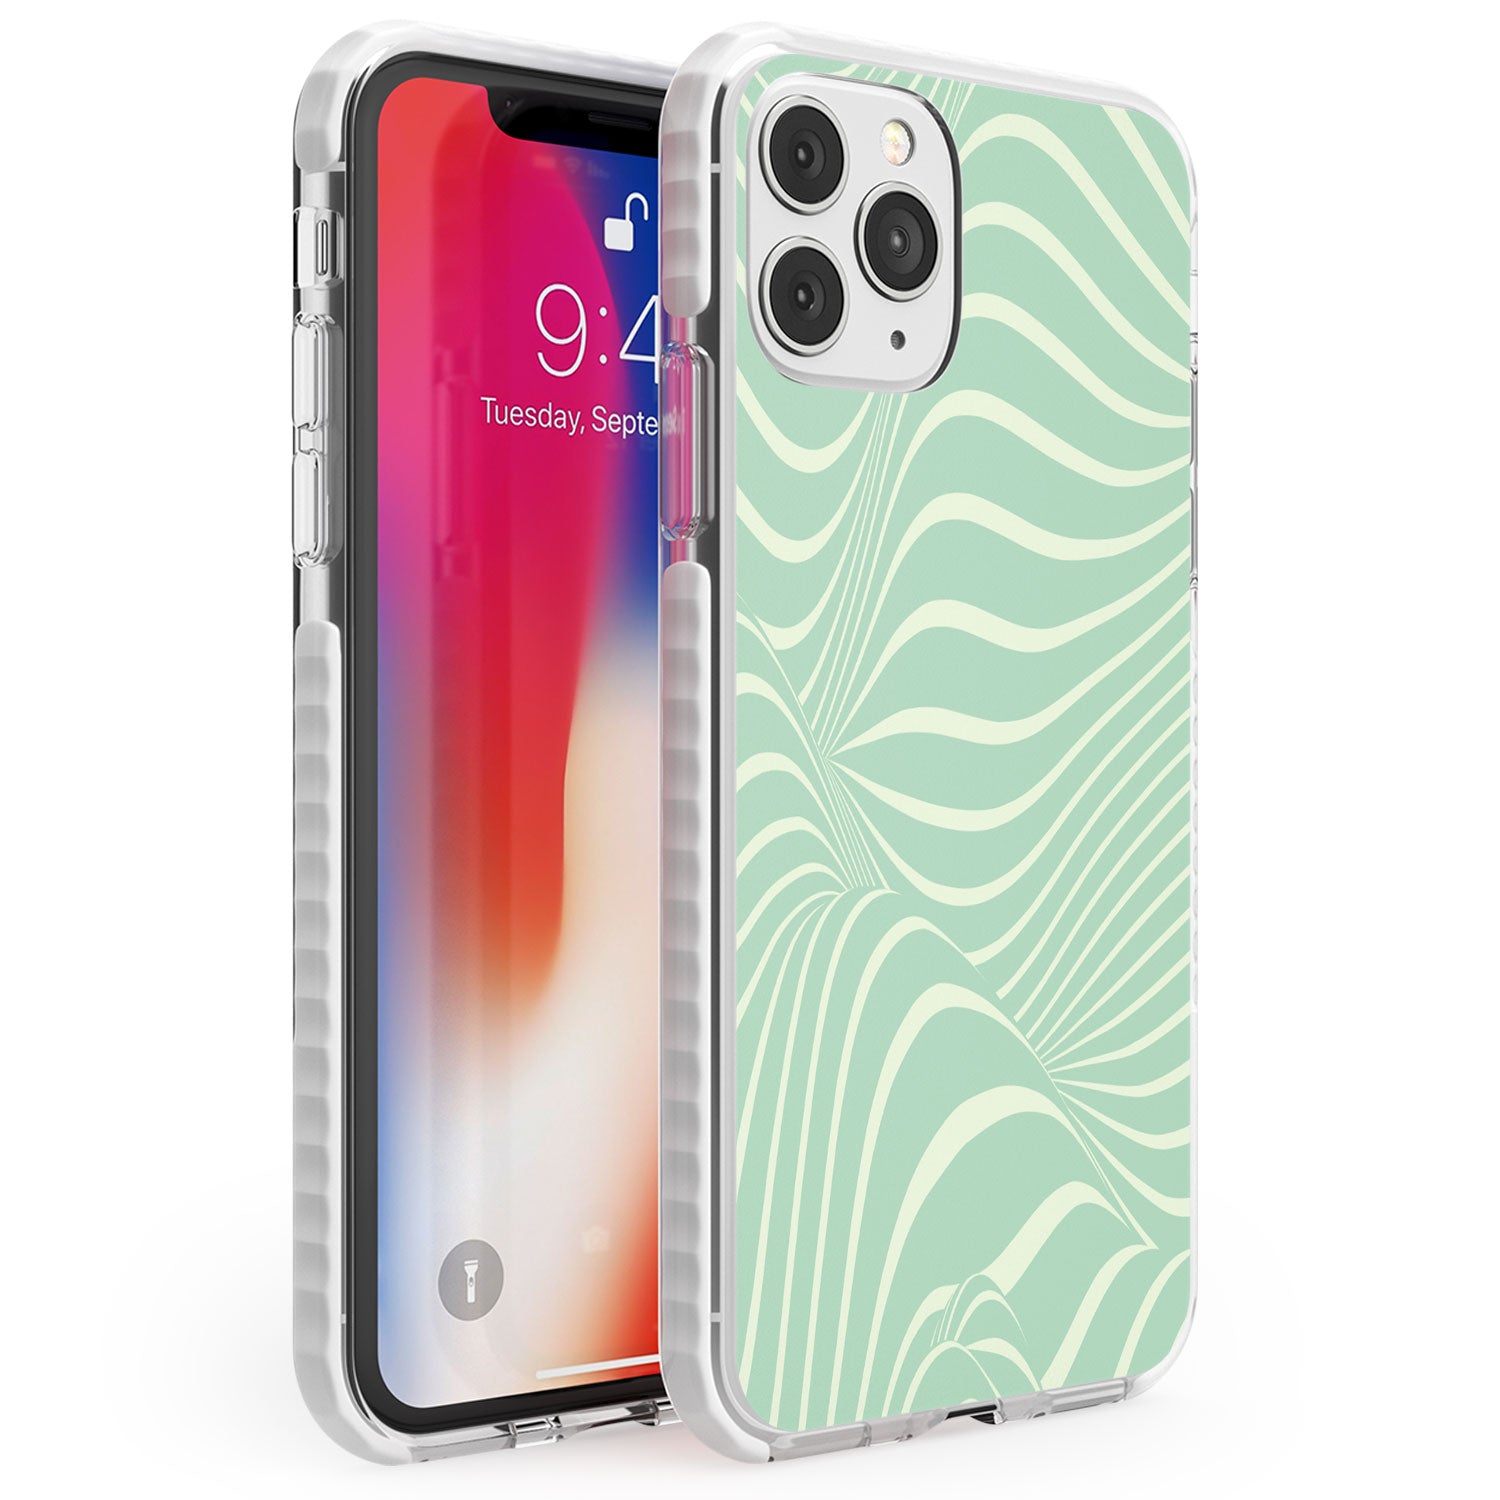 Mint Green Distorted Line Phone Case iPhone 11 Pro Max / Impact Case,iPhone 11 Pro / Impact Case,iPhone 12 Pro / Impact Case,iPhone 12 Pro Max / Impact Case Blanc Space